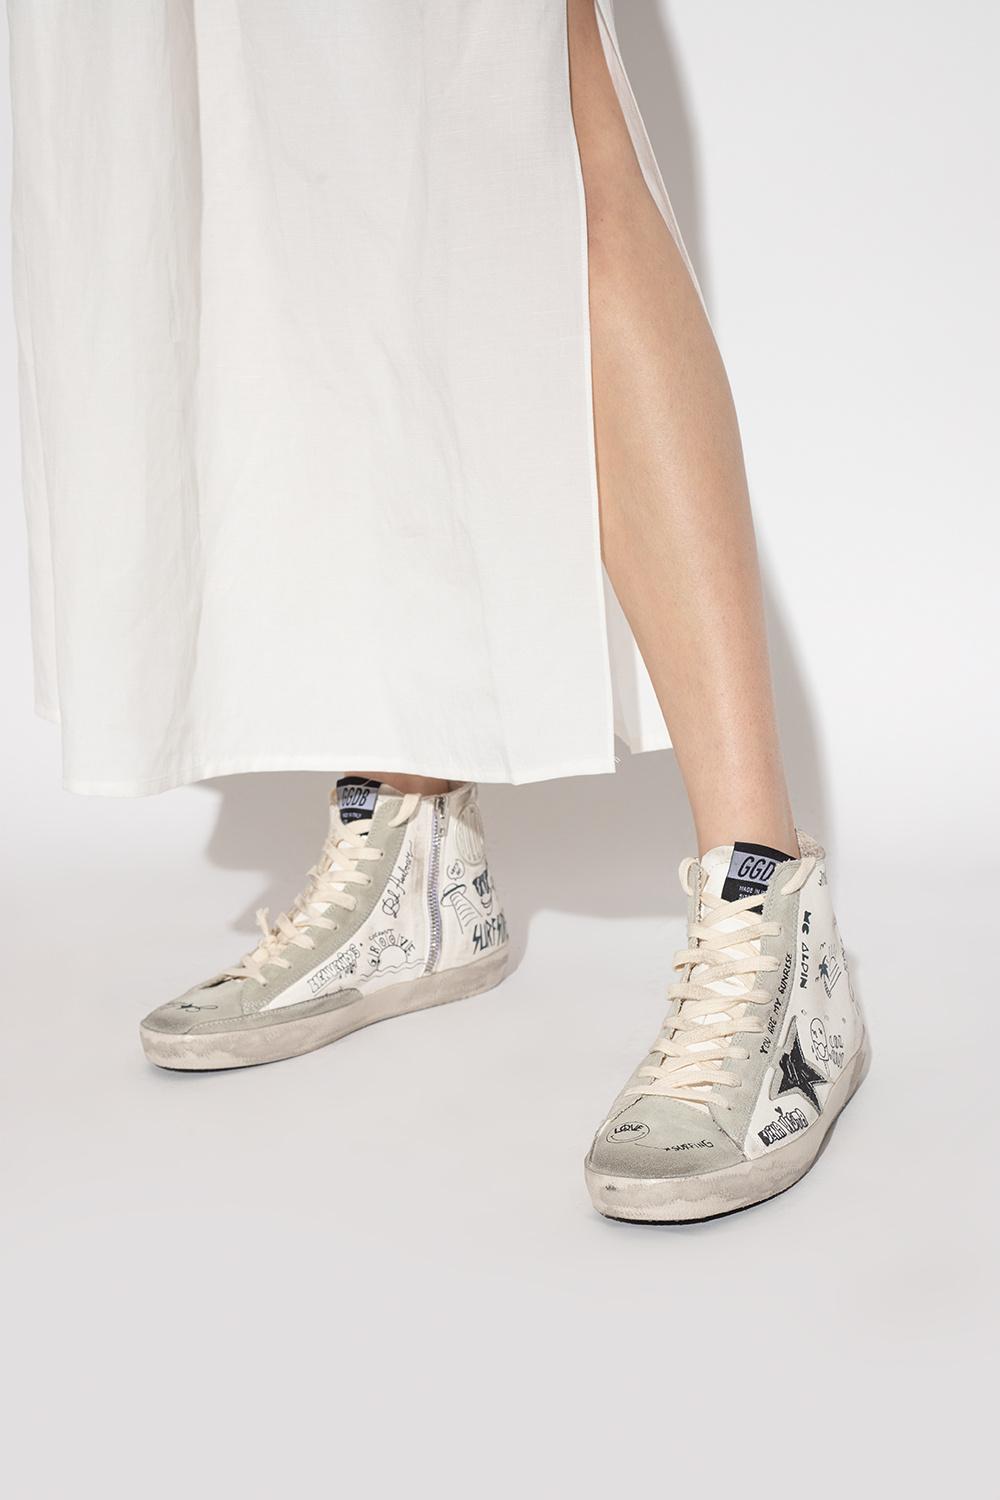 Golden Goose 'francy Classic' High-top Sneakers in White | Lyst